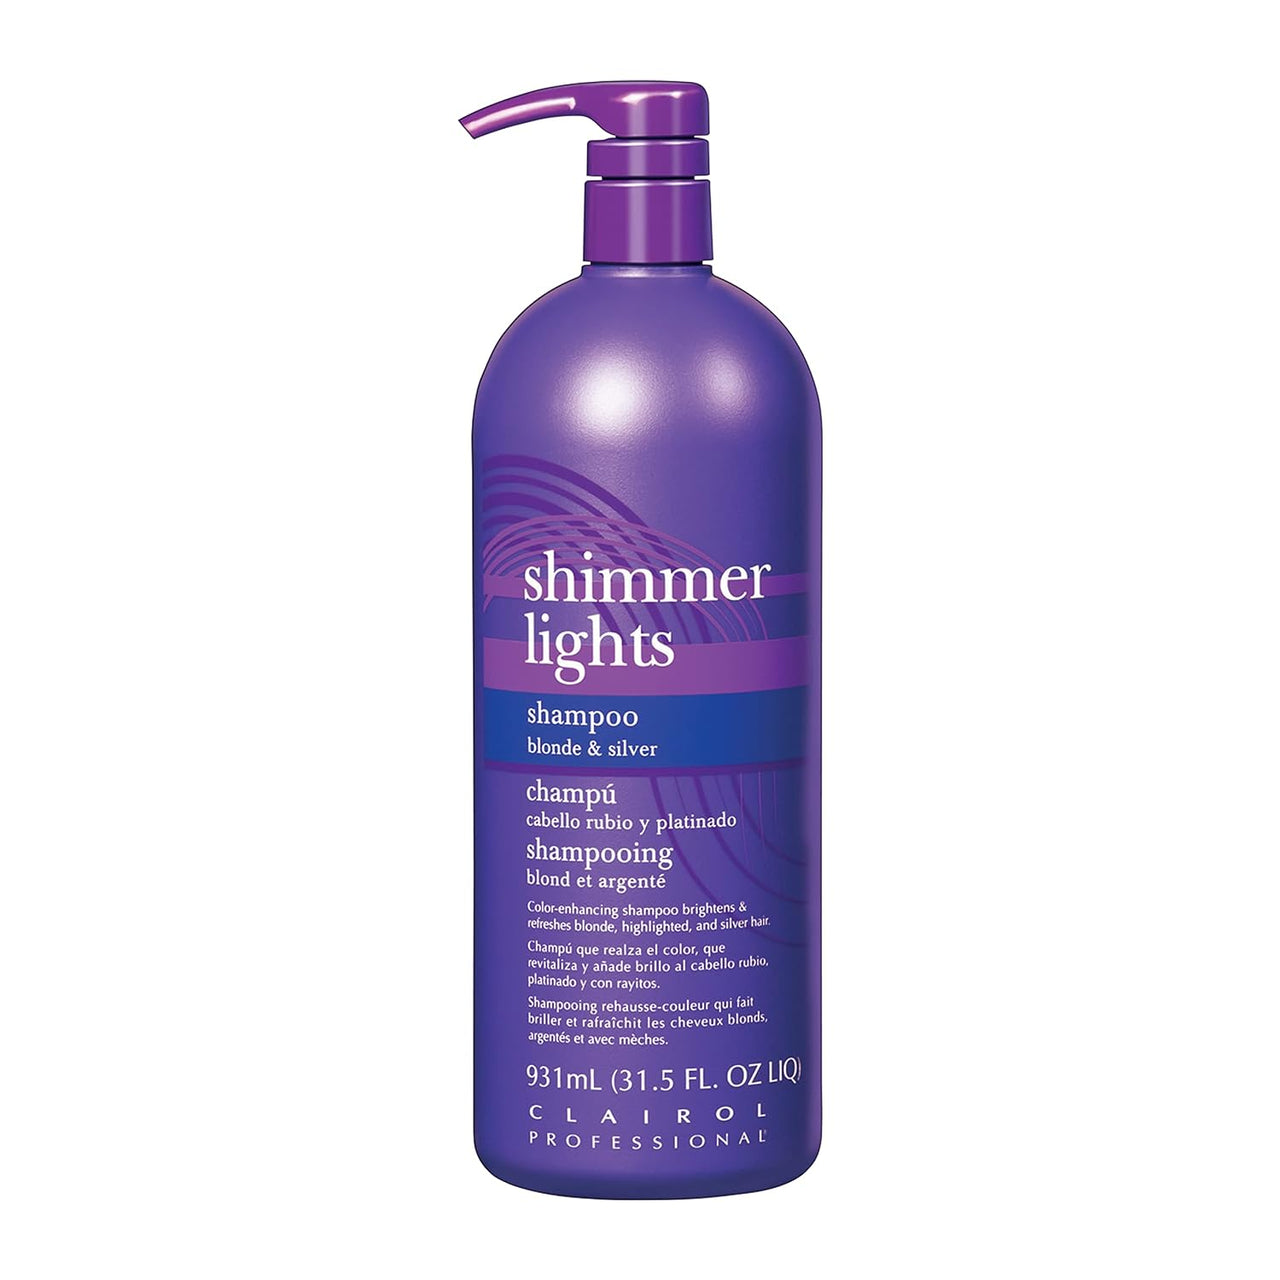 CLAIROL PROFESSIONAL Shimmer Lights Purple Shampoo, 31.5 fl. Oz Neutralizes Brass & Yellow Tones For Blonde, Silver, Gray & Highlighted Hair